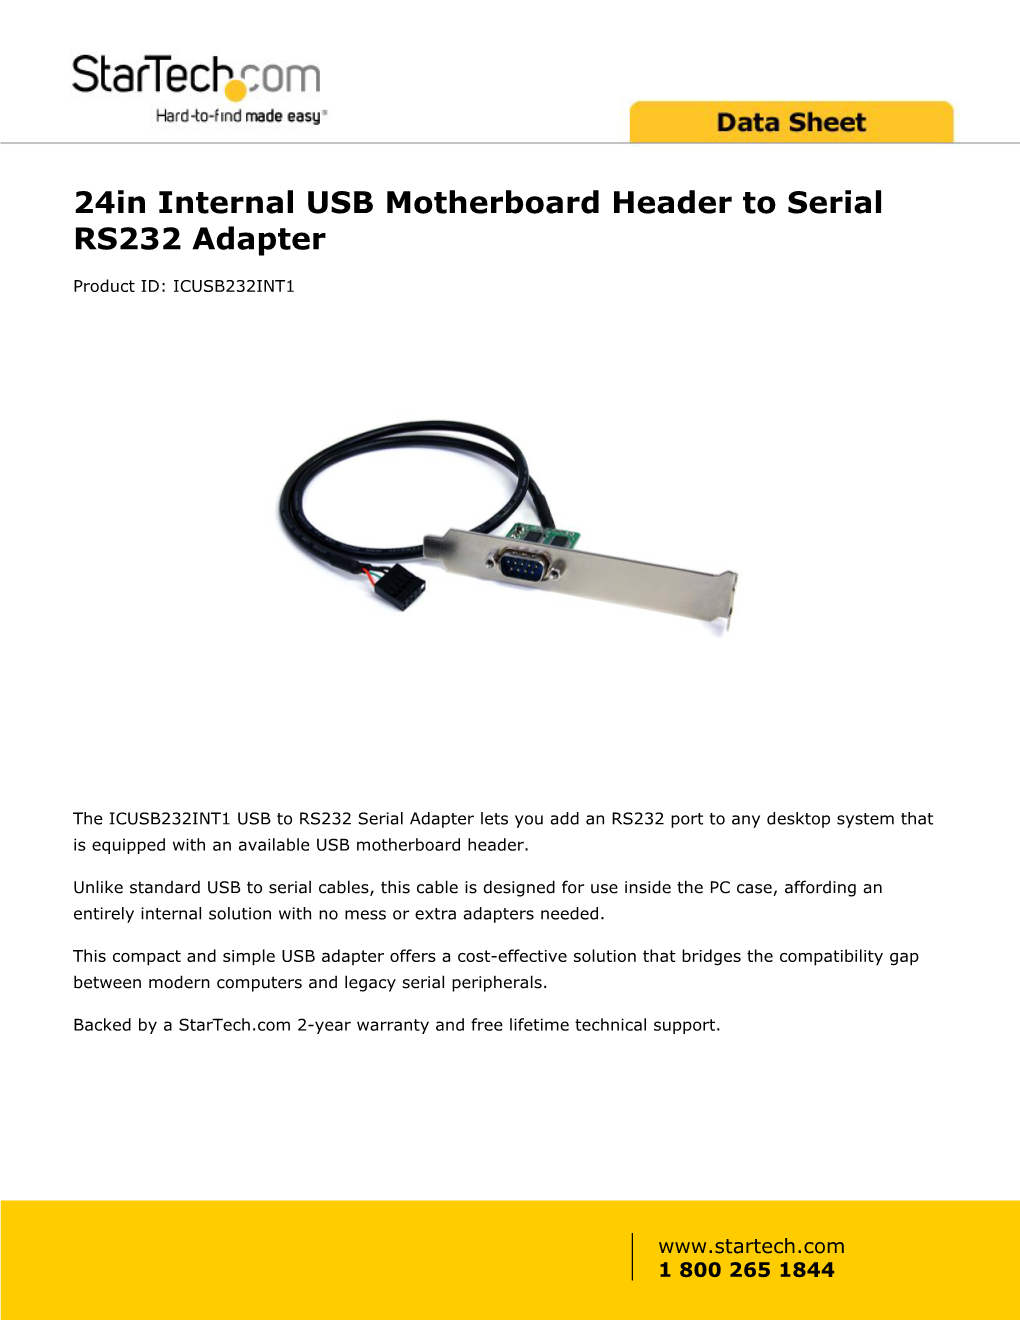 24In Internal USB Motherboard Header to Serial RS232 Adapter